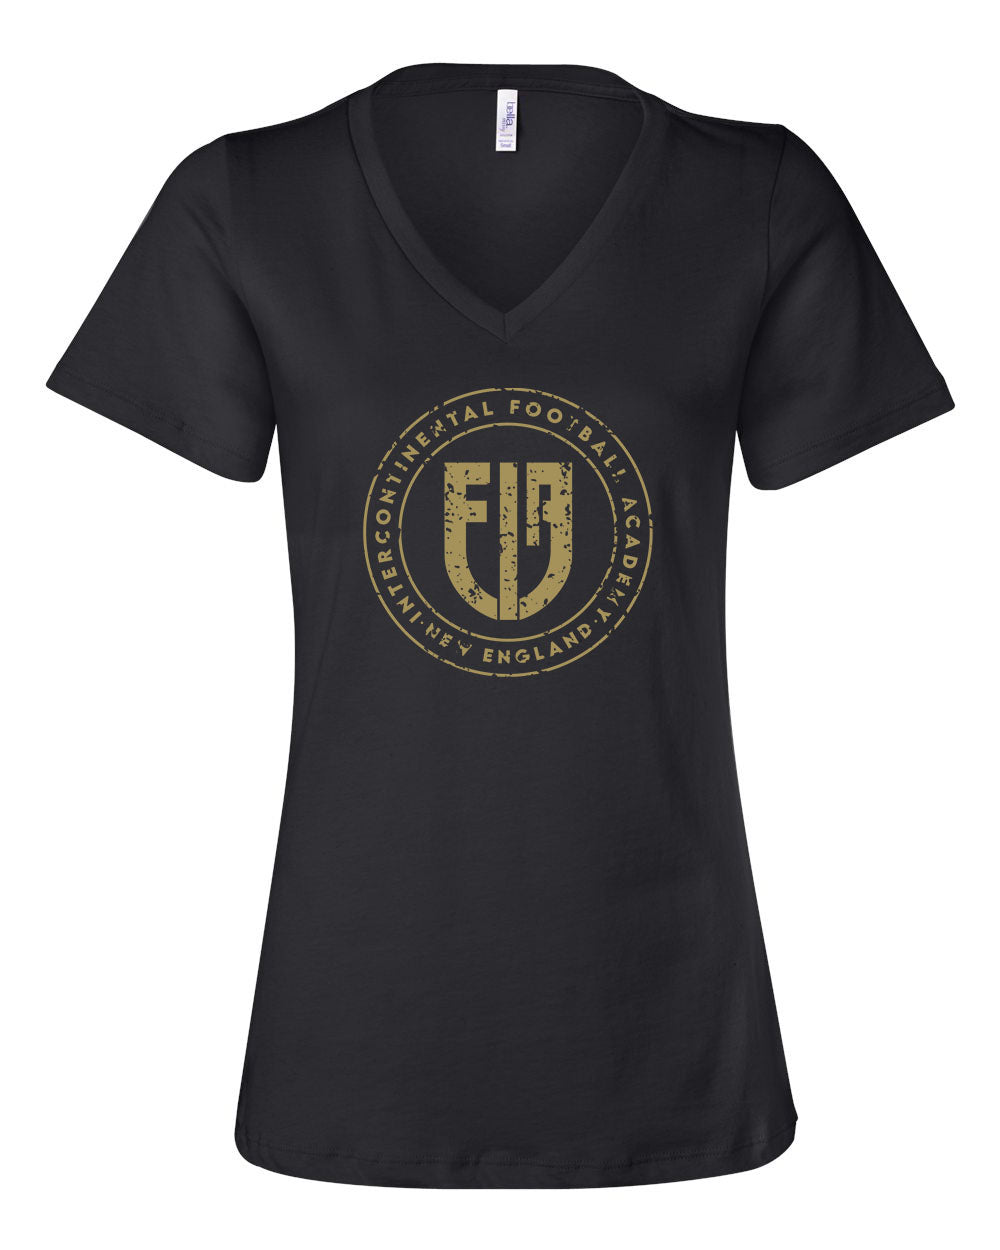 IFA Ladies Relaxed V-Neck Tee "Grunge" - 6405 (color options available)